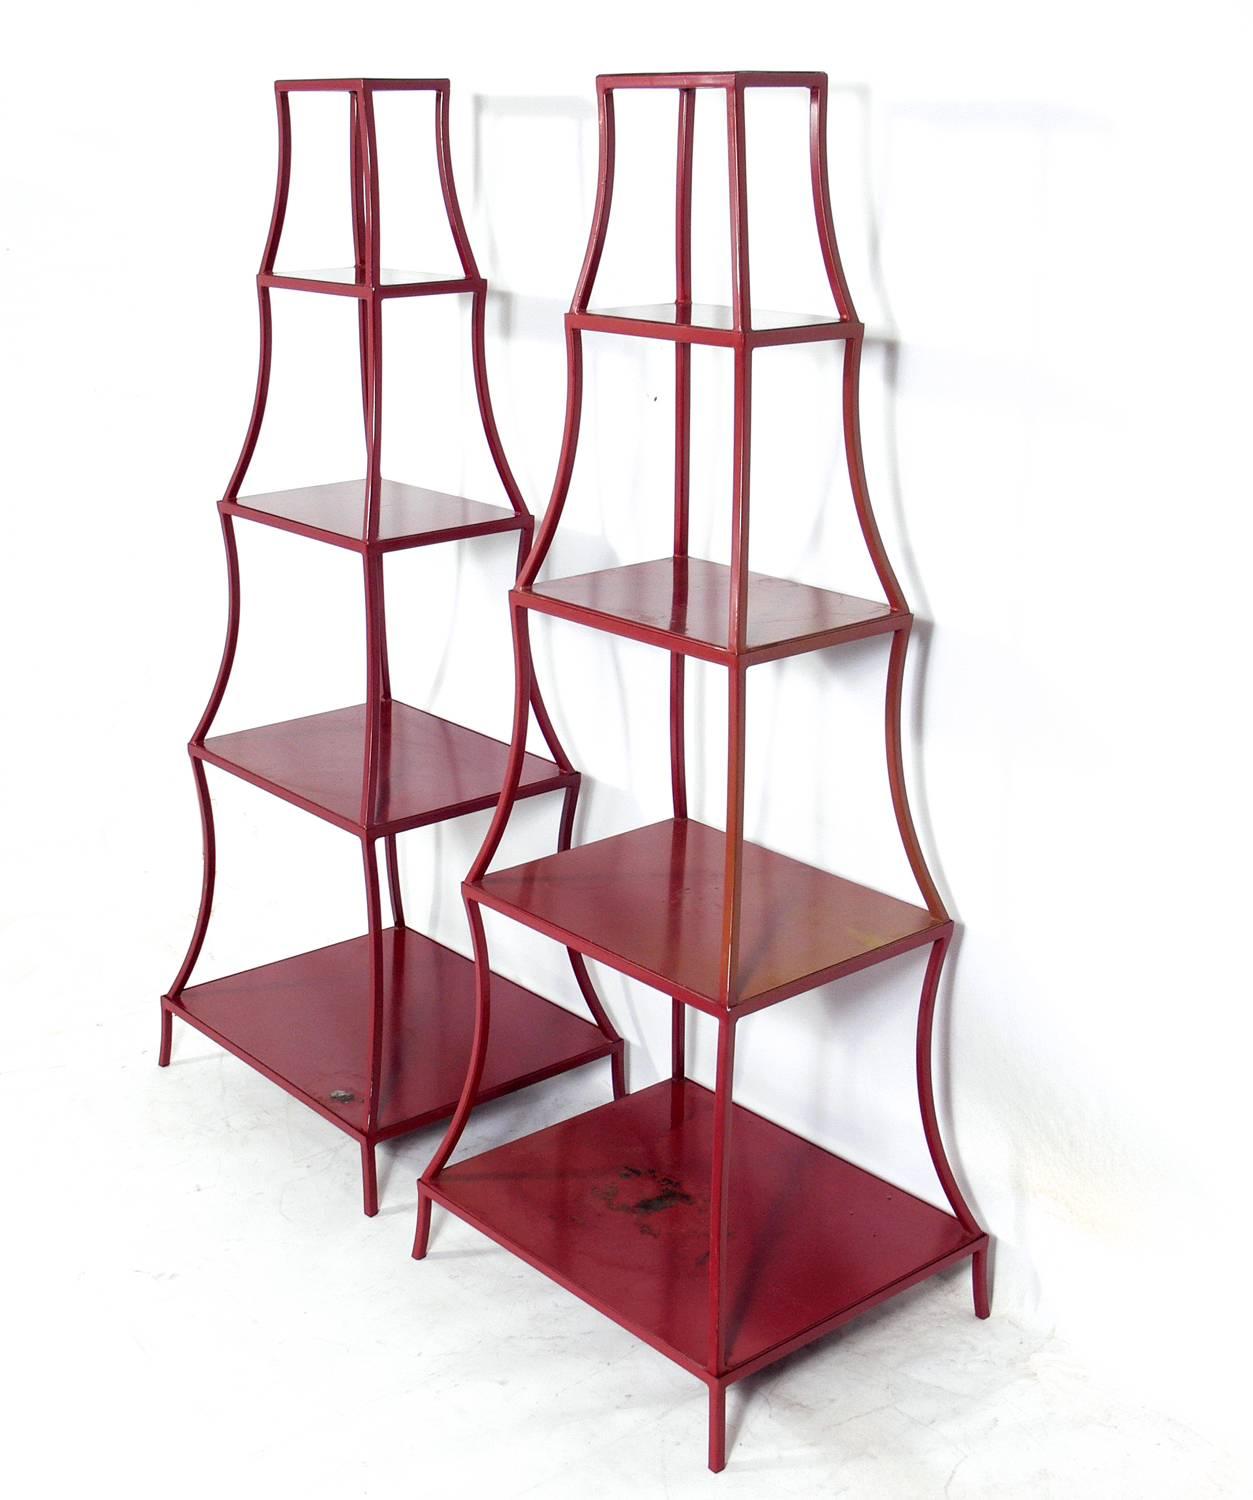 Pair of Chinese red color pagoda shelves, probably American, circa 1970s. They are a versatile size and can be used as bookshelves, display vitrines, or even as a bar. They are made up of four stacking sections in each unit, and can be easily broken